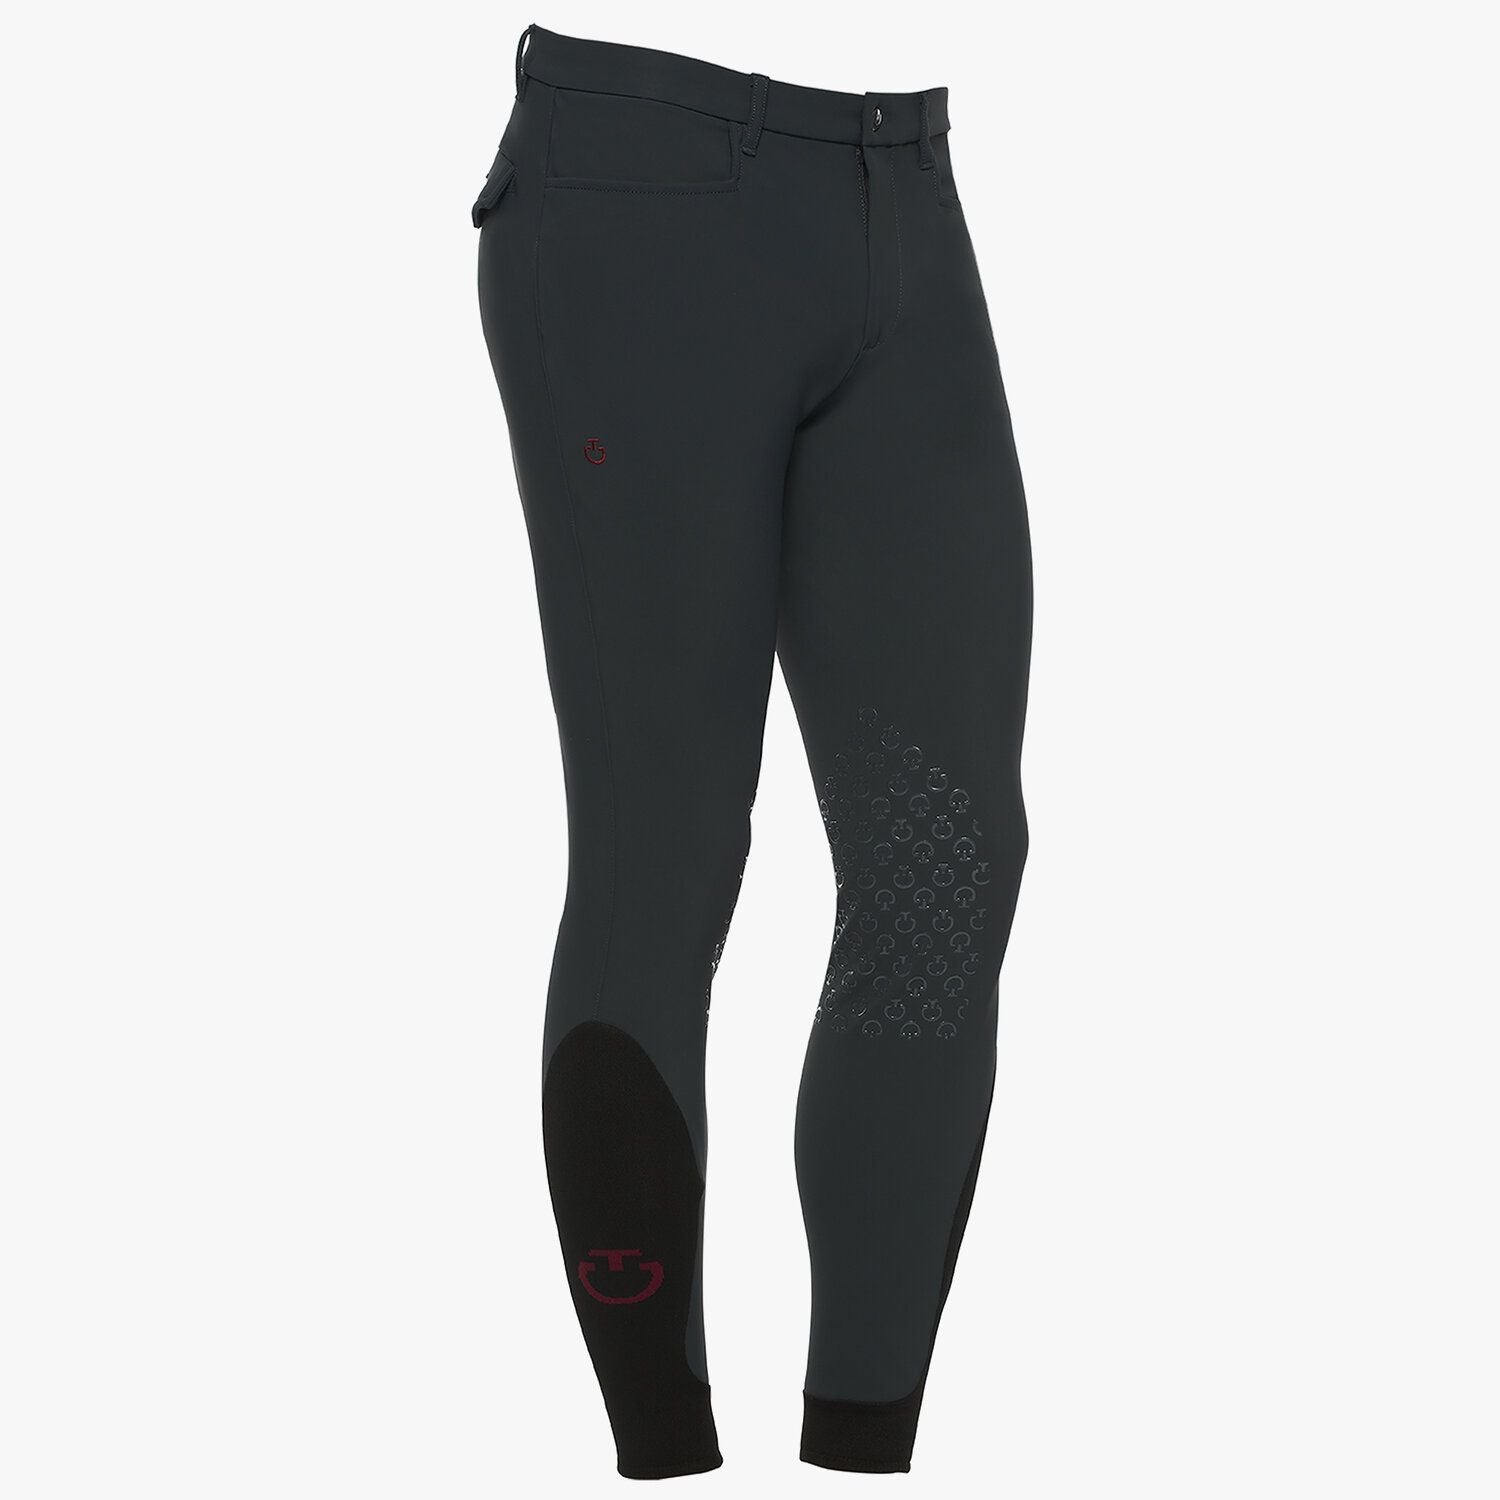 Men's breeches with New Knee Grip in Charcoal Grey